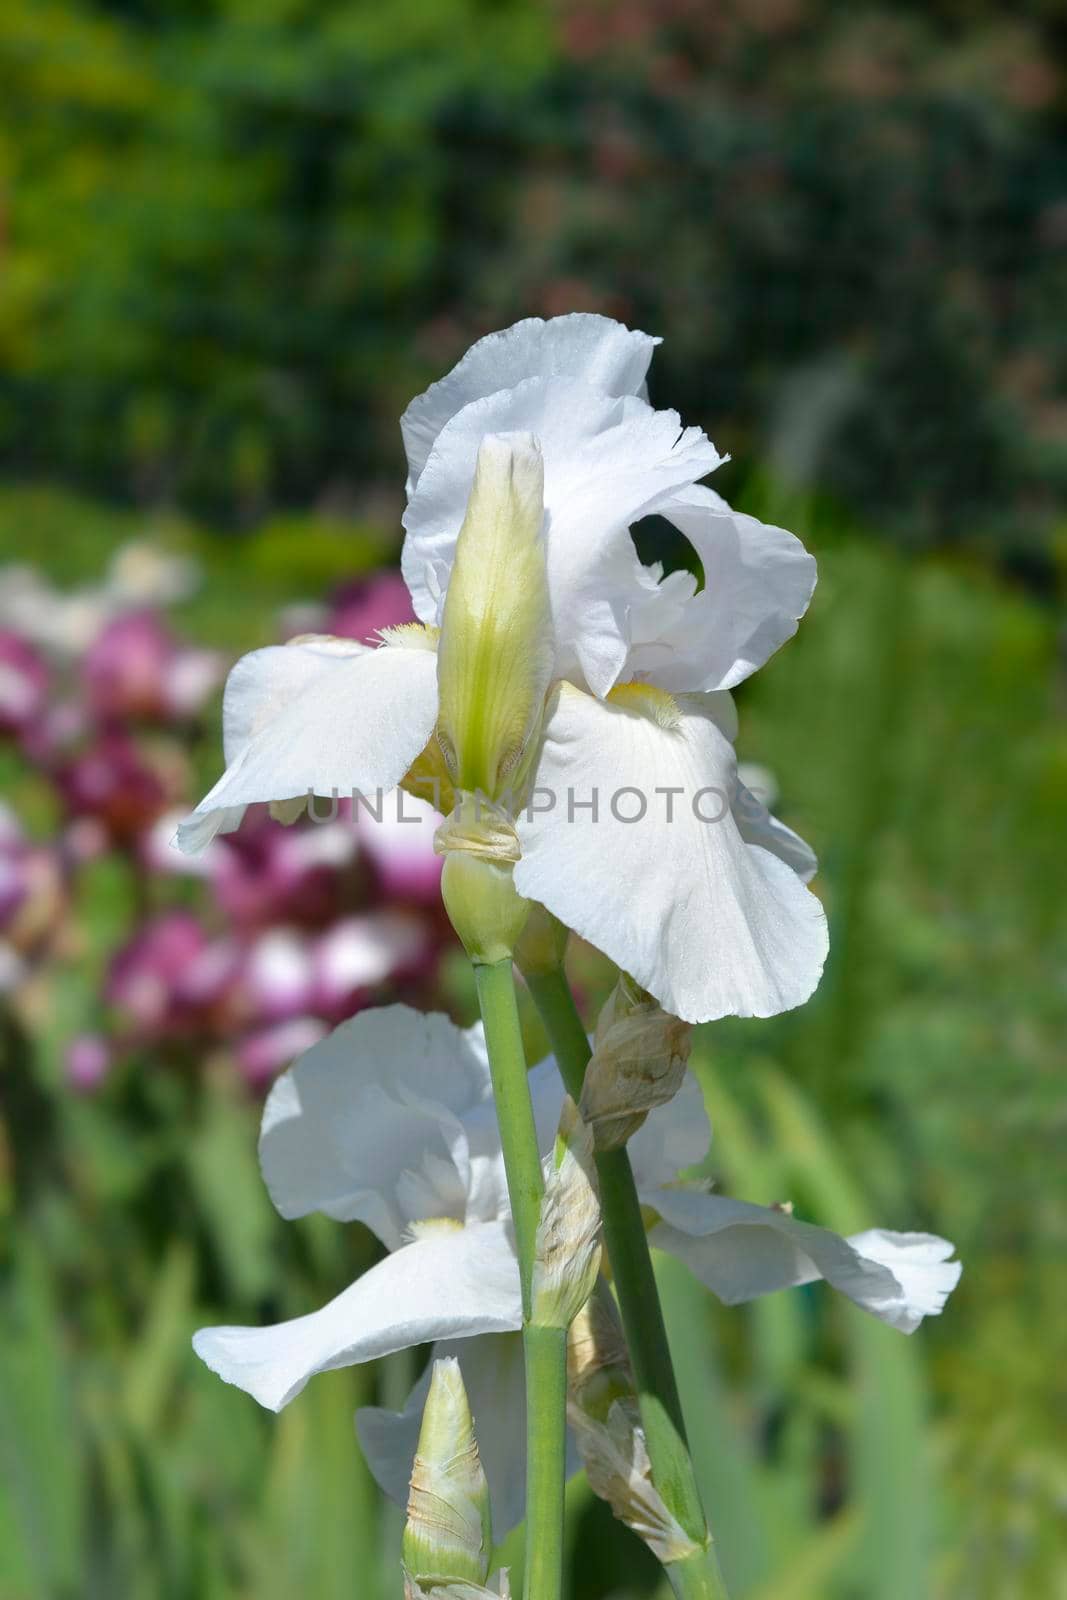 Tall bearded iris Tranquility by nahhan